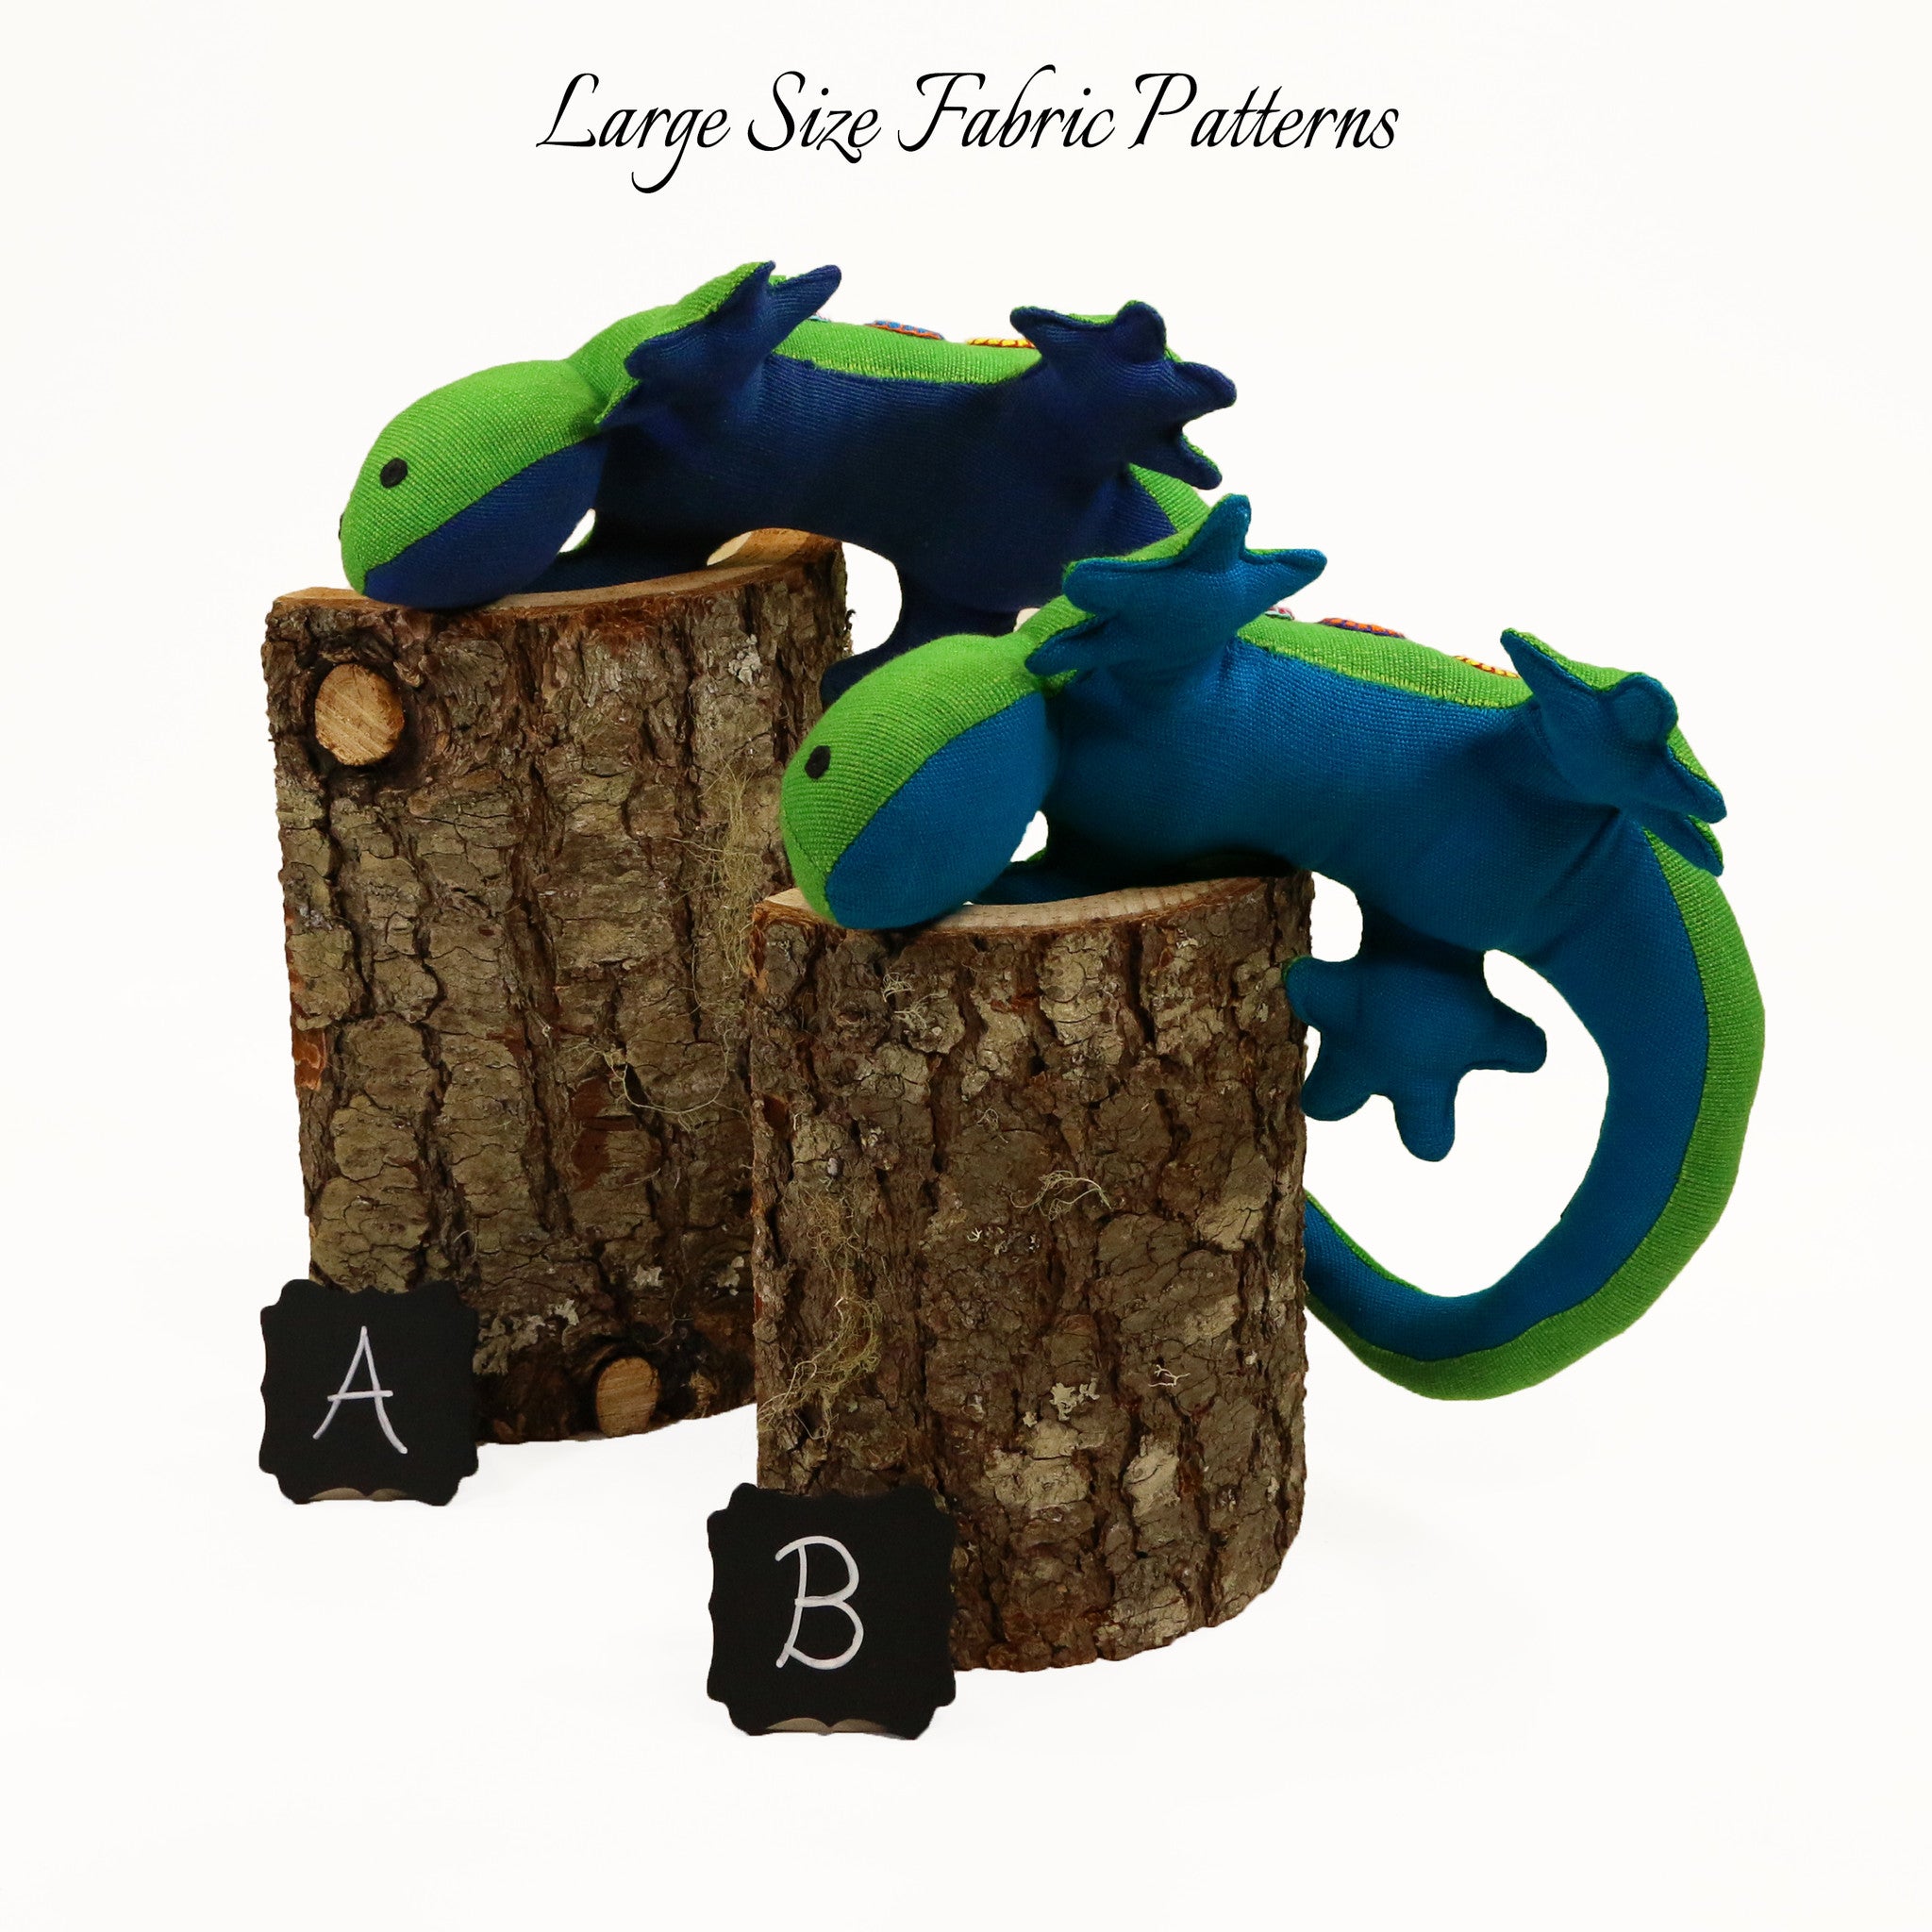 Larry, the Lizard – all large size fabric patterns shown